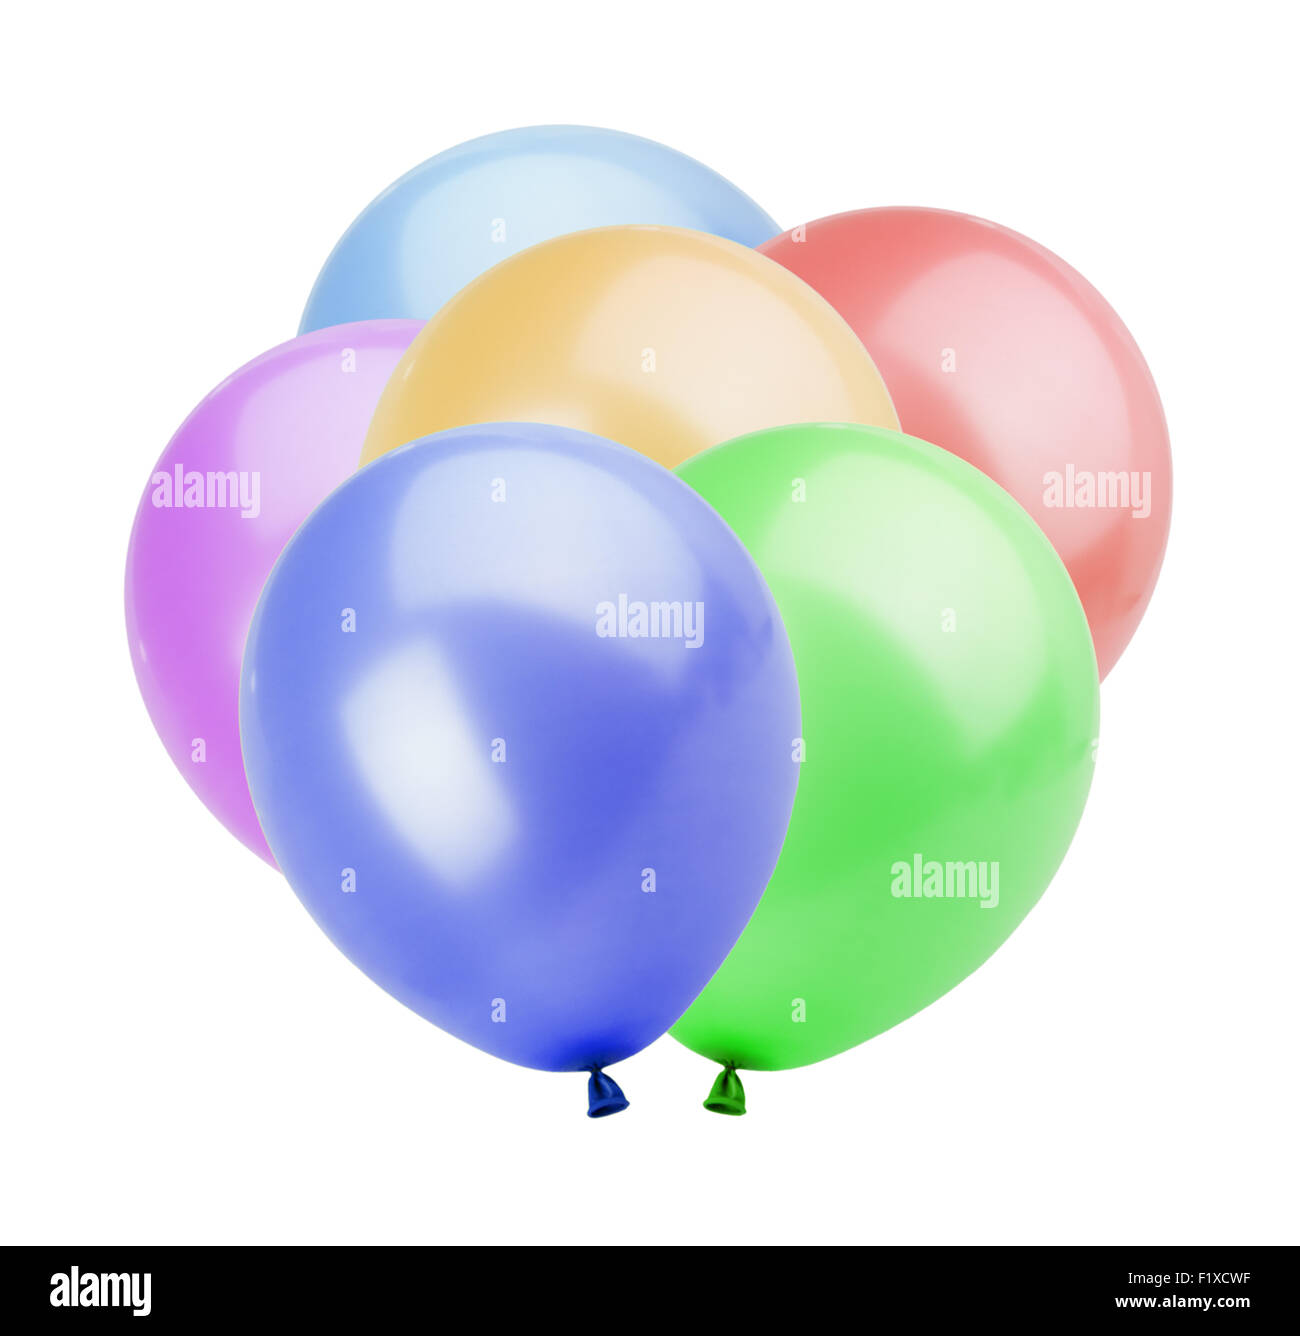 colorful balloons on white background Stock Photo